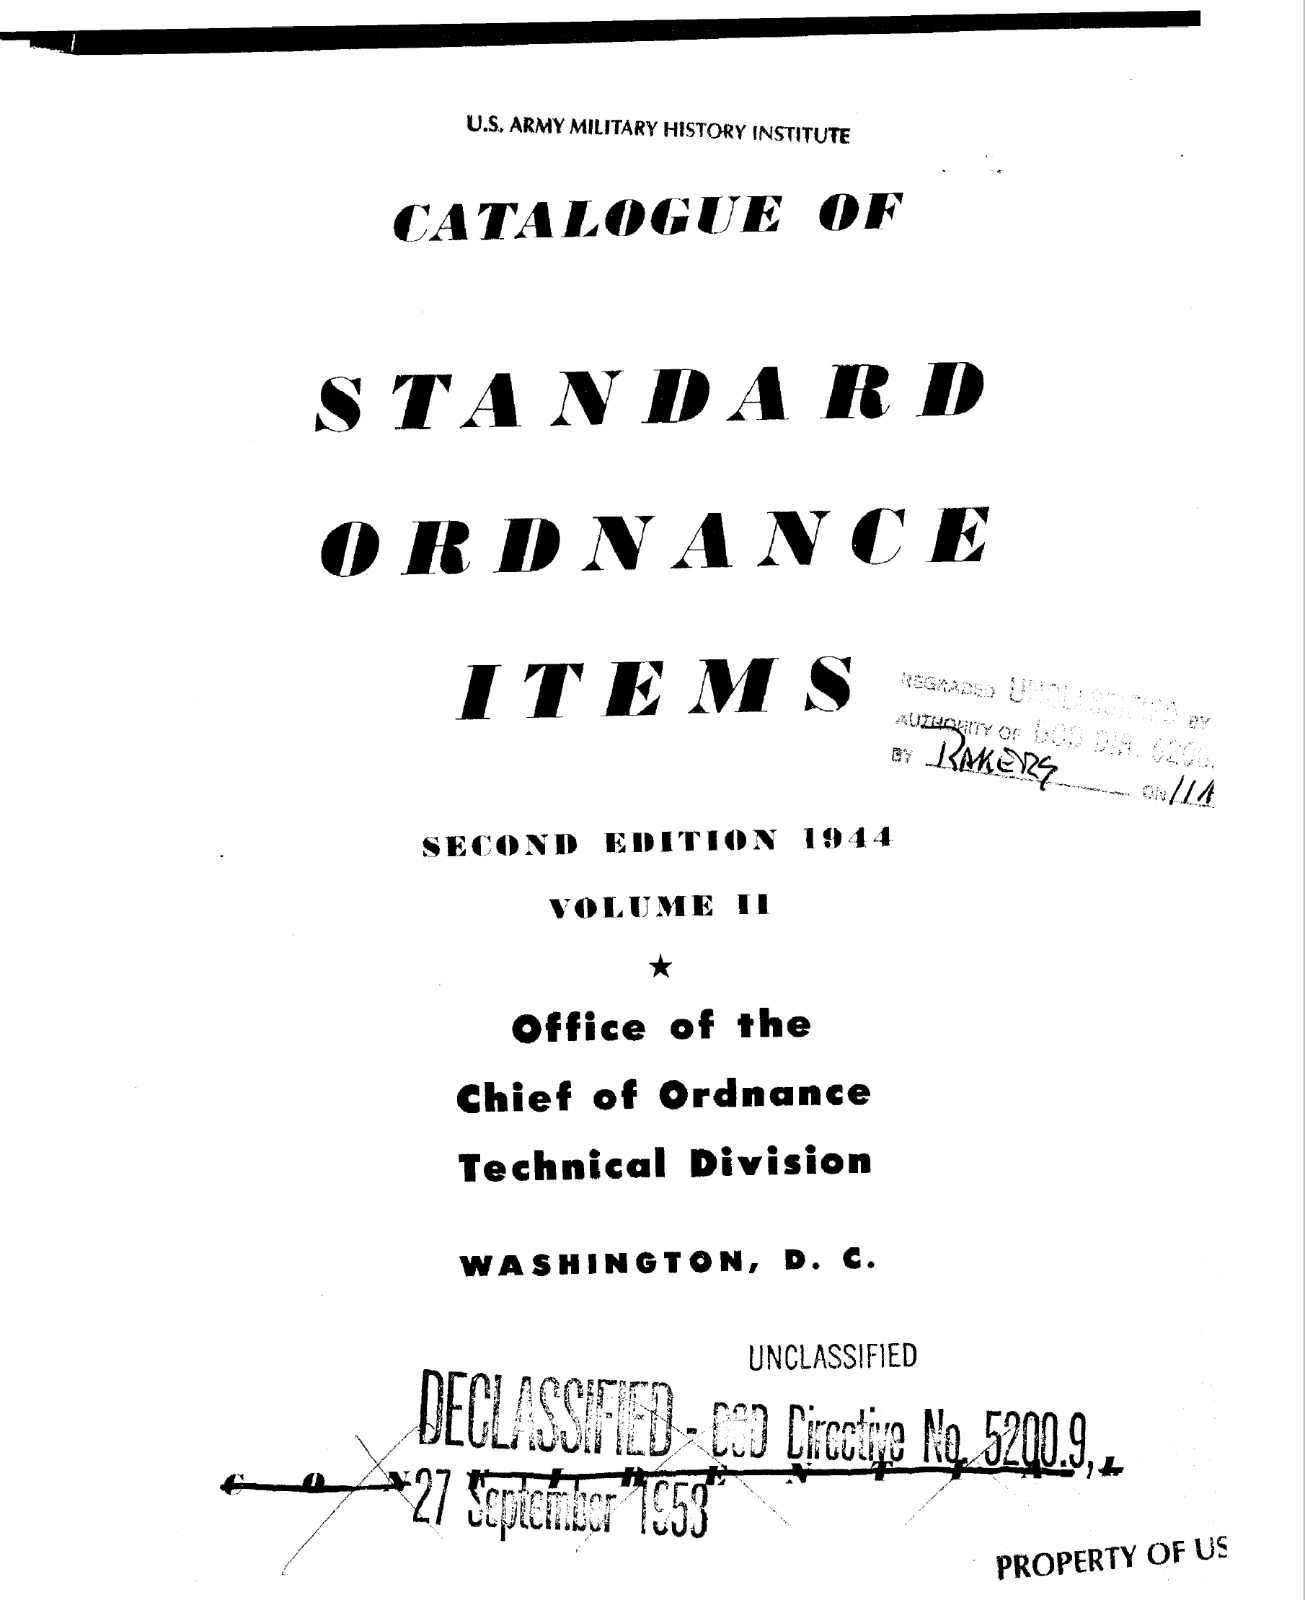 195 Page 1944 2nd Ed. Volume 2 Catalog Of STANDARD ORDNANCE ITEMS Manual on CD